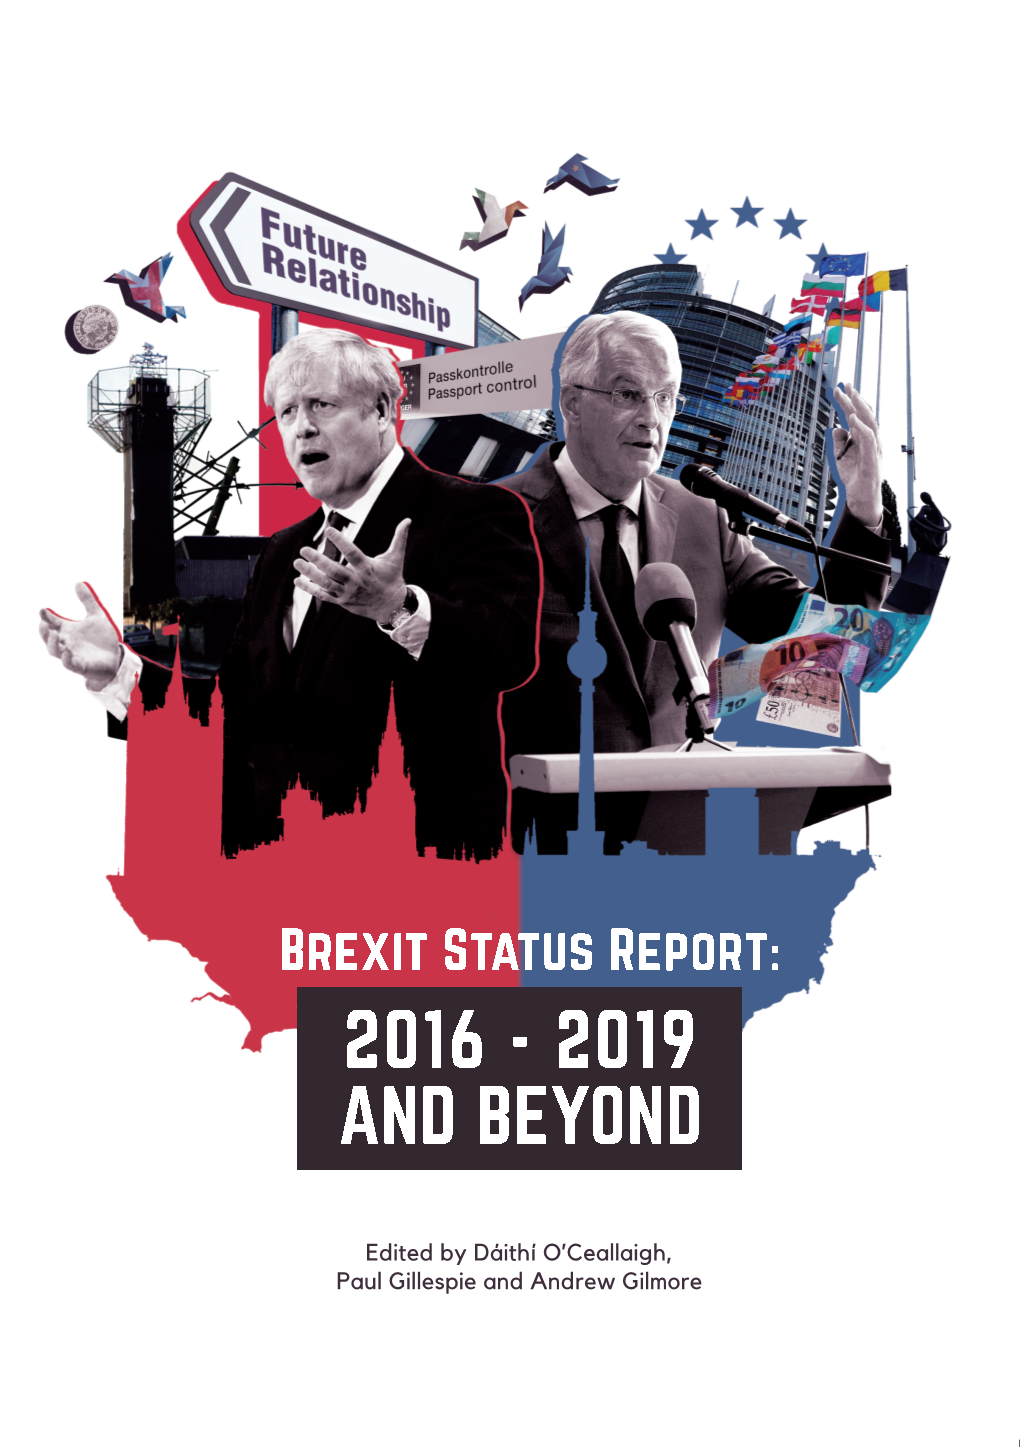 Brexit Status Report: 2016 - 2019 and Beyond